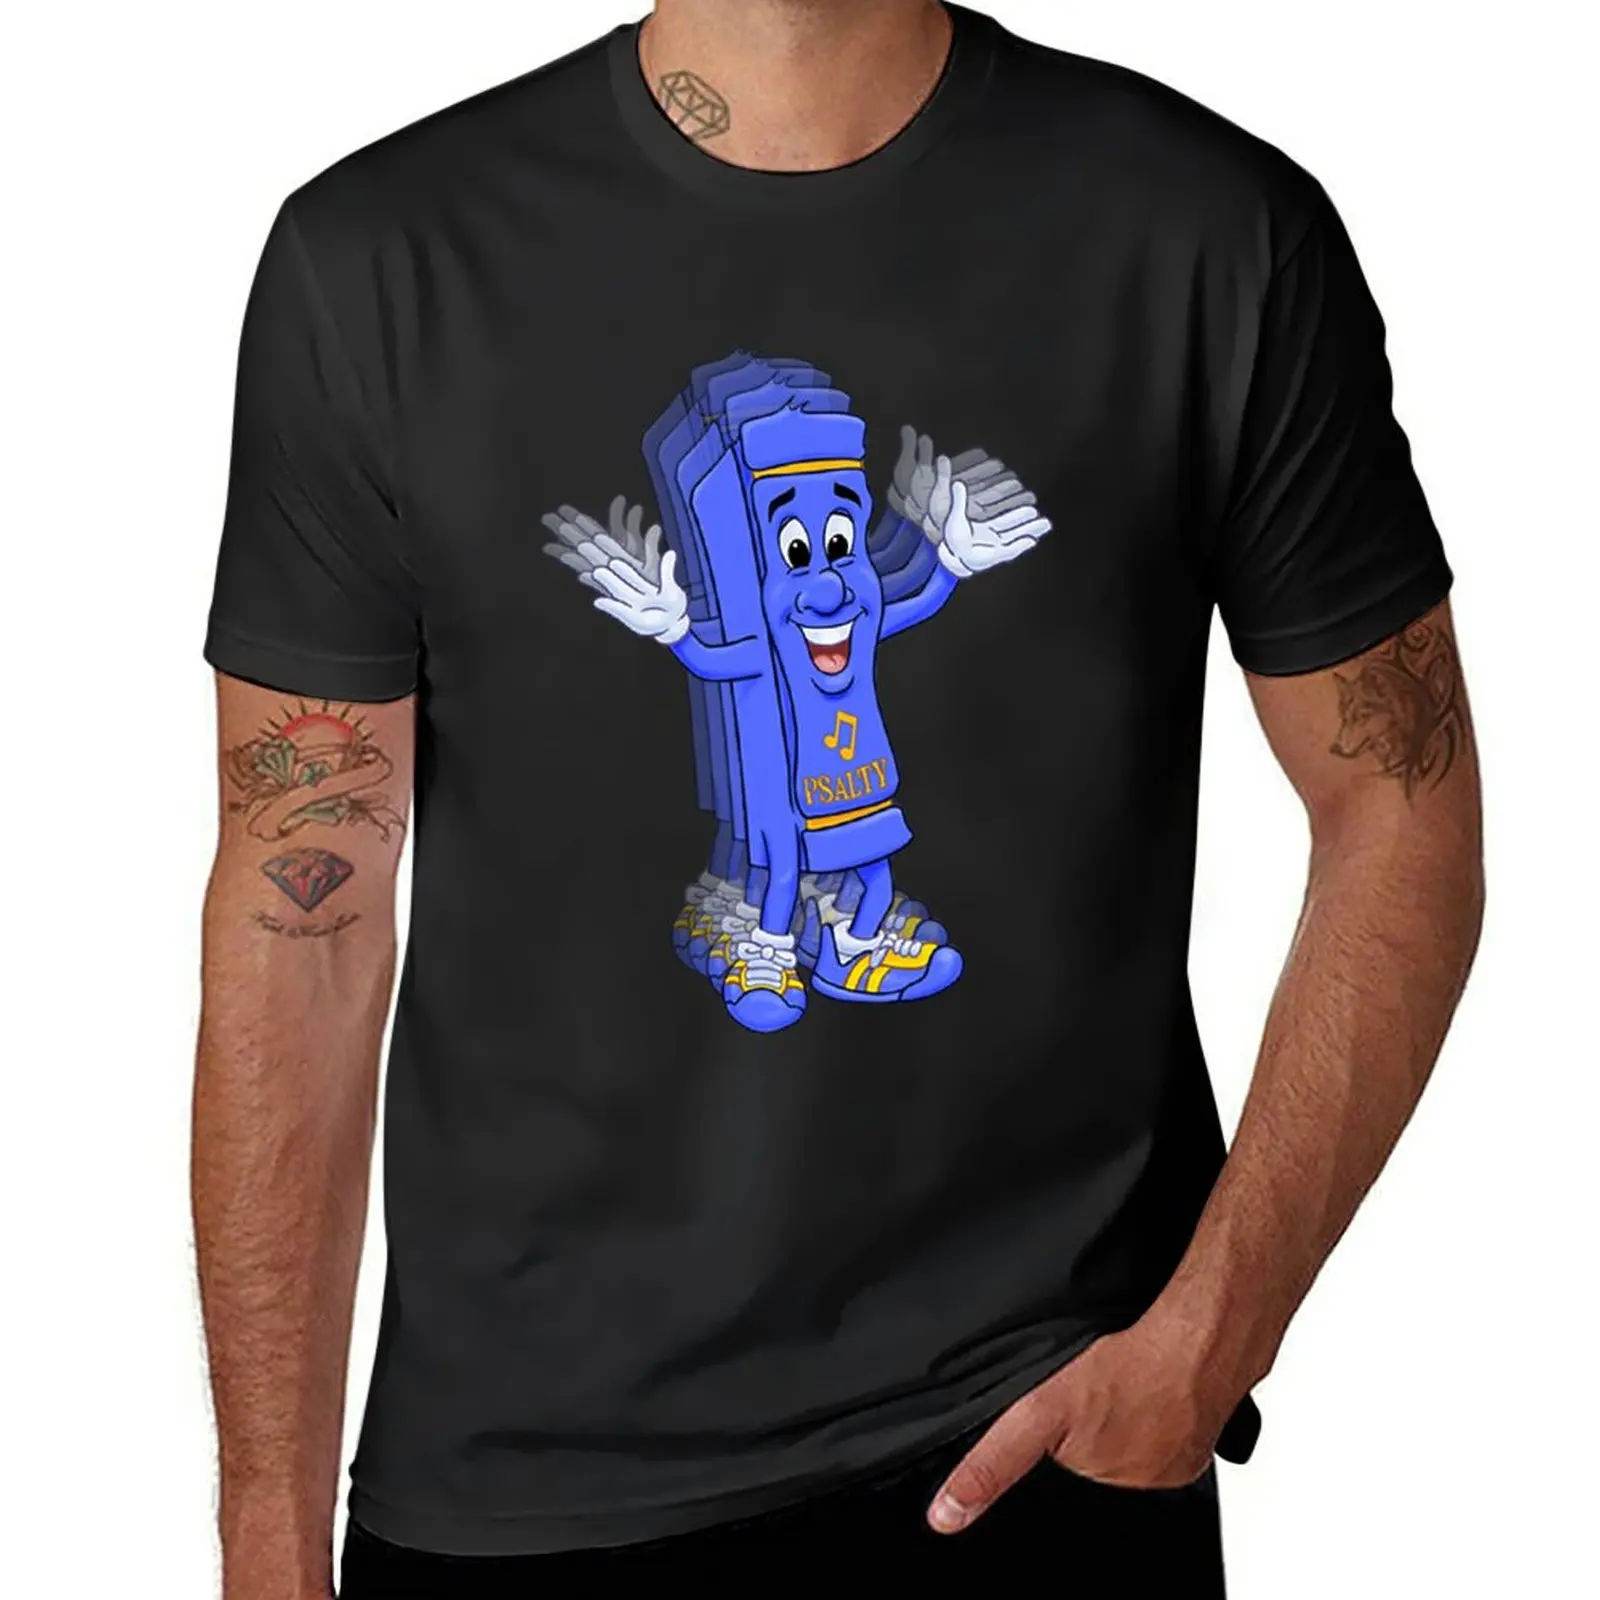 

New Psalty has arrived T-Shirt boys t shirts tops mens t shirts